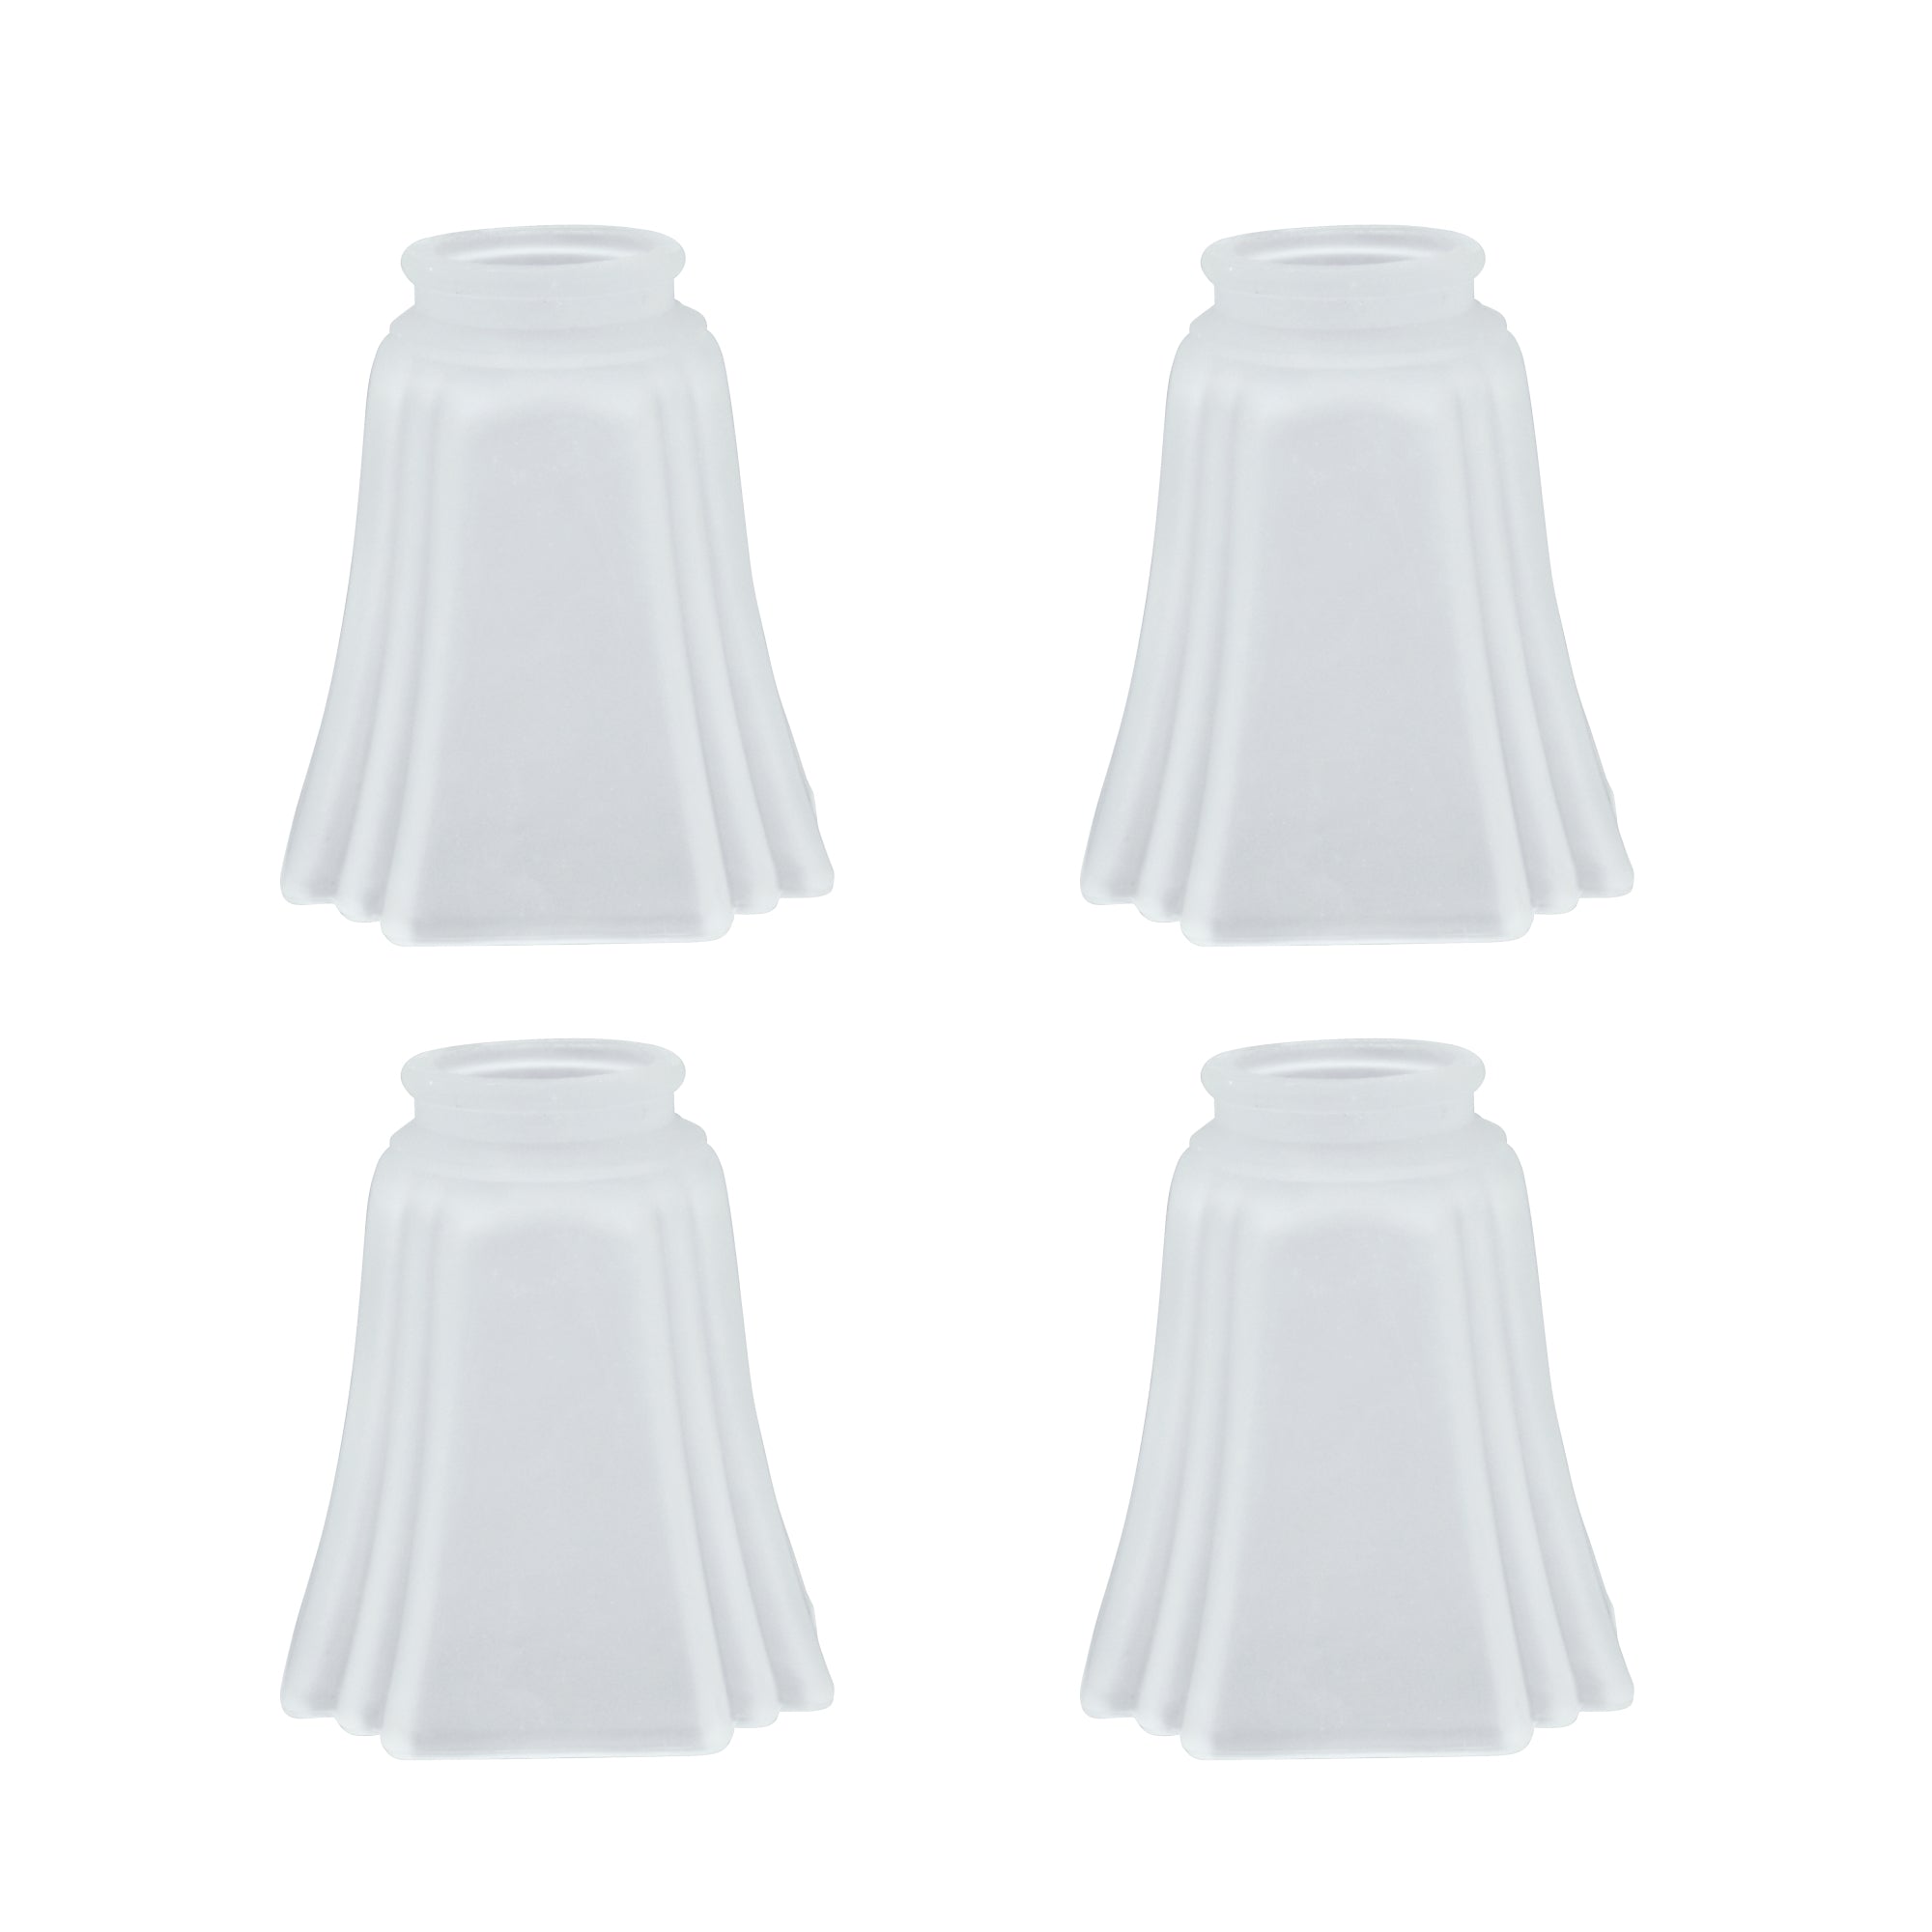 4 Pack Ceiling Fan Light Covers, Transitional Style Replacement